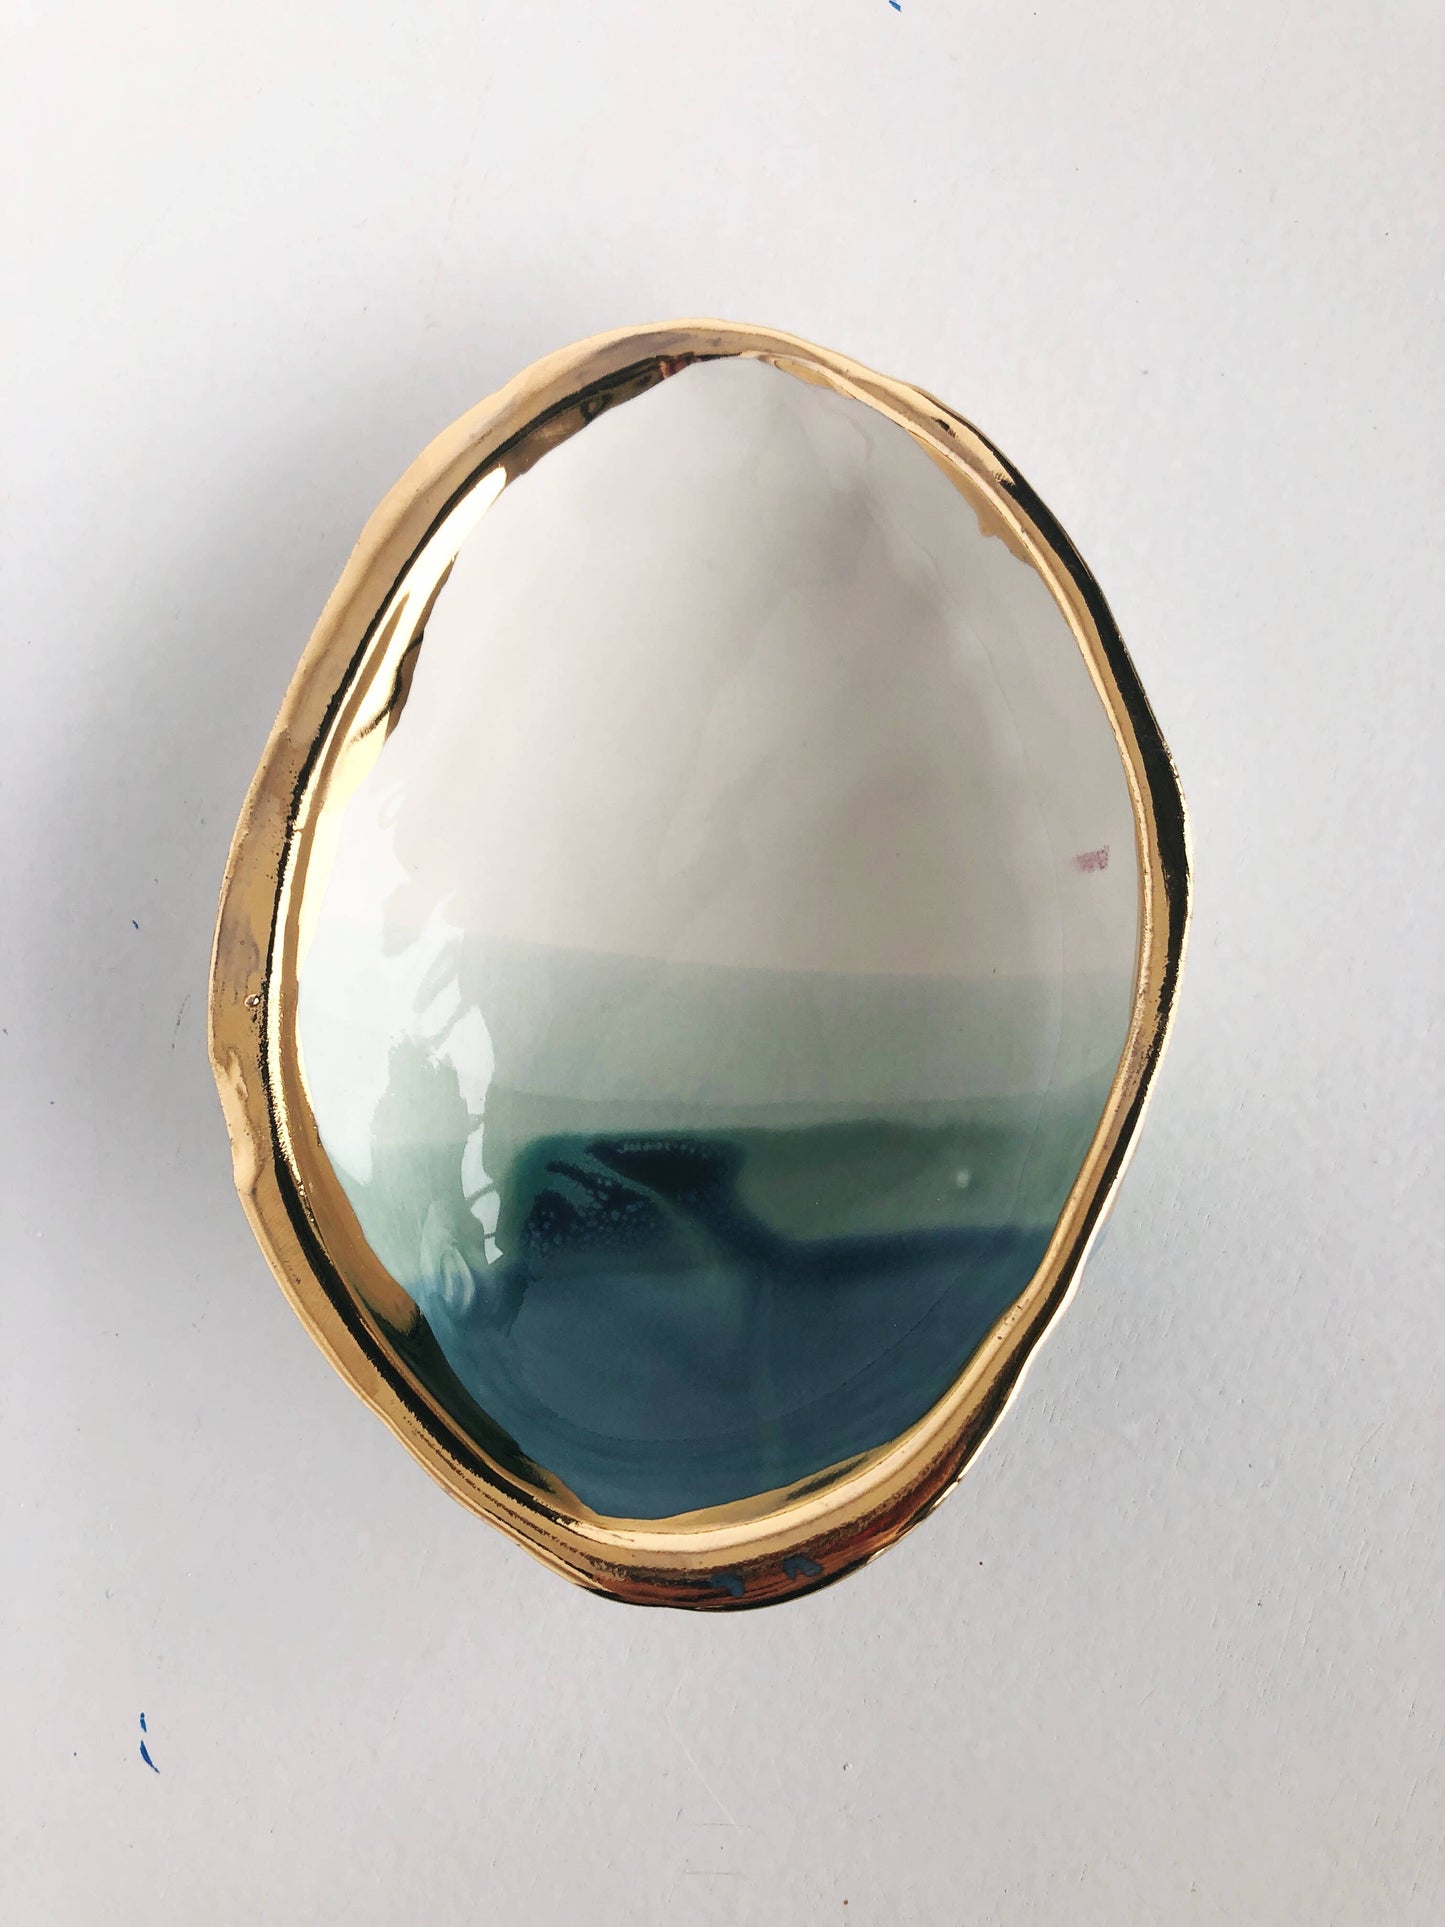 Abalone Ritual Dish in Ocean with 22K Gold